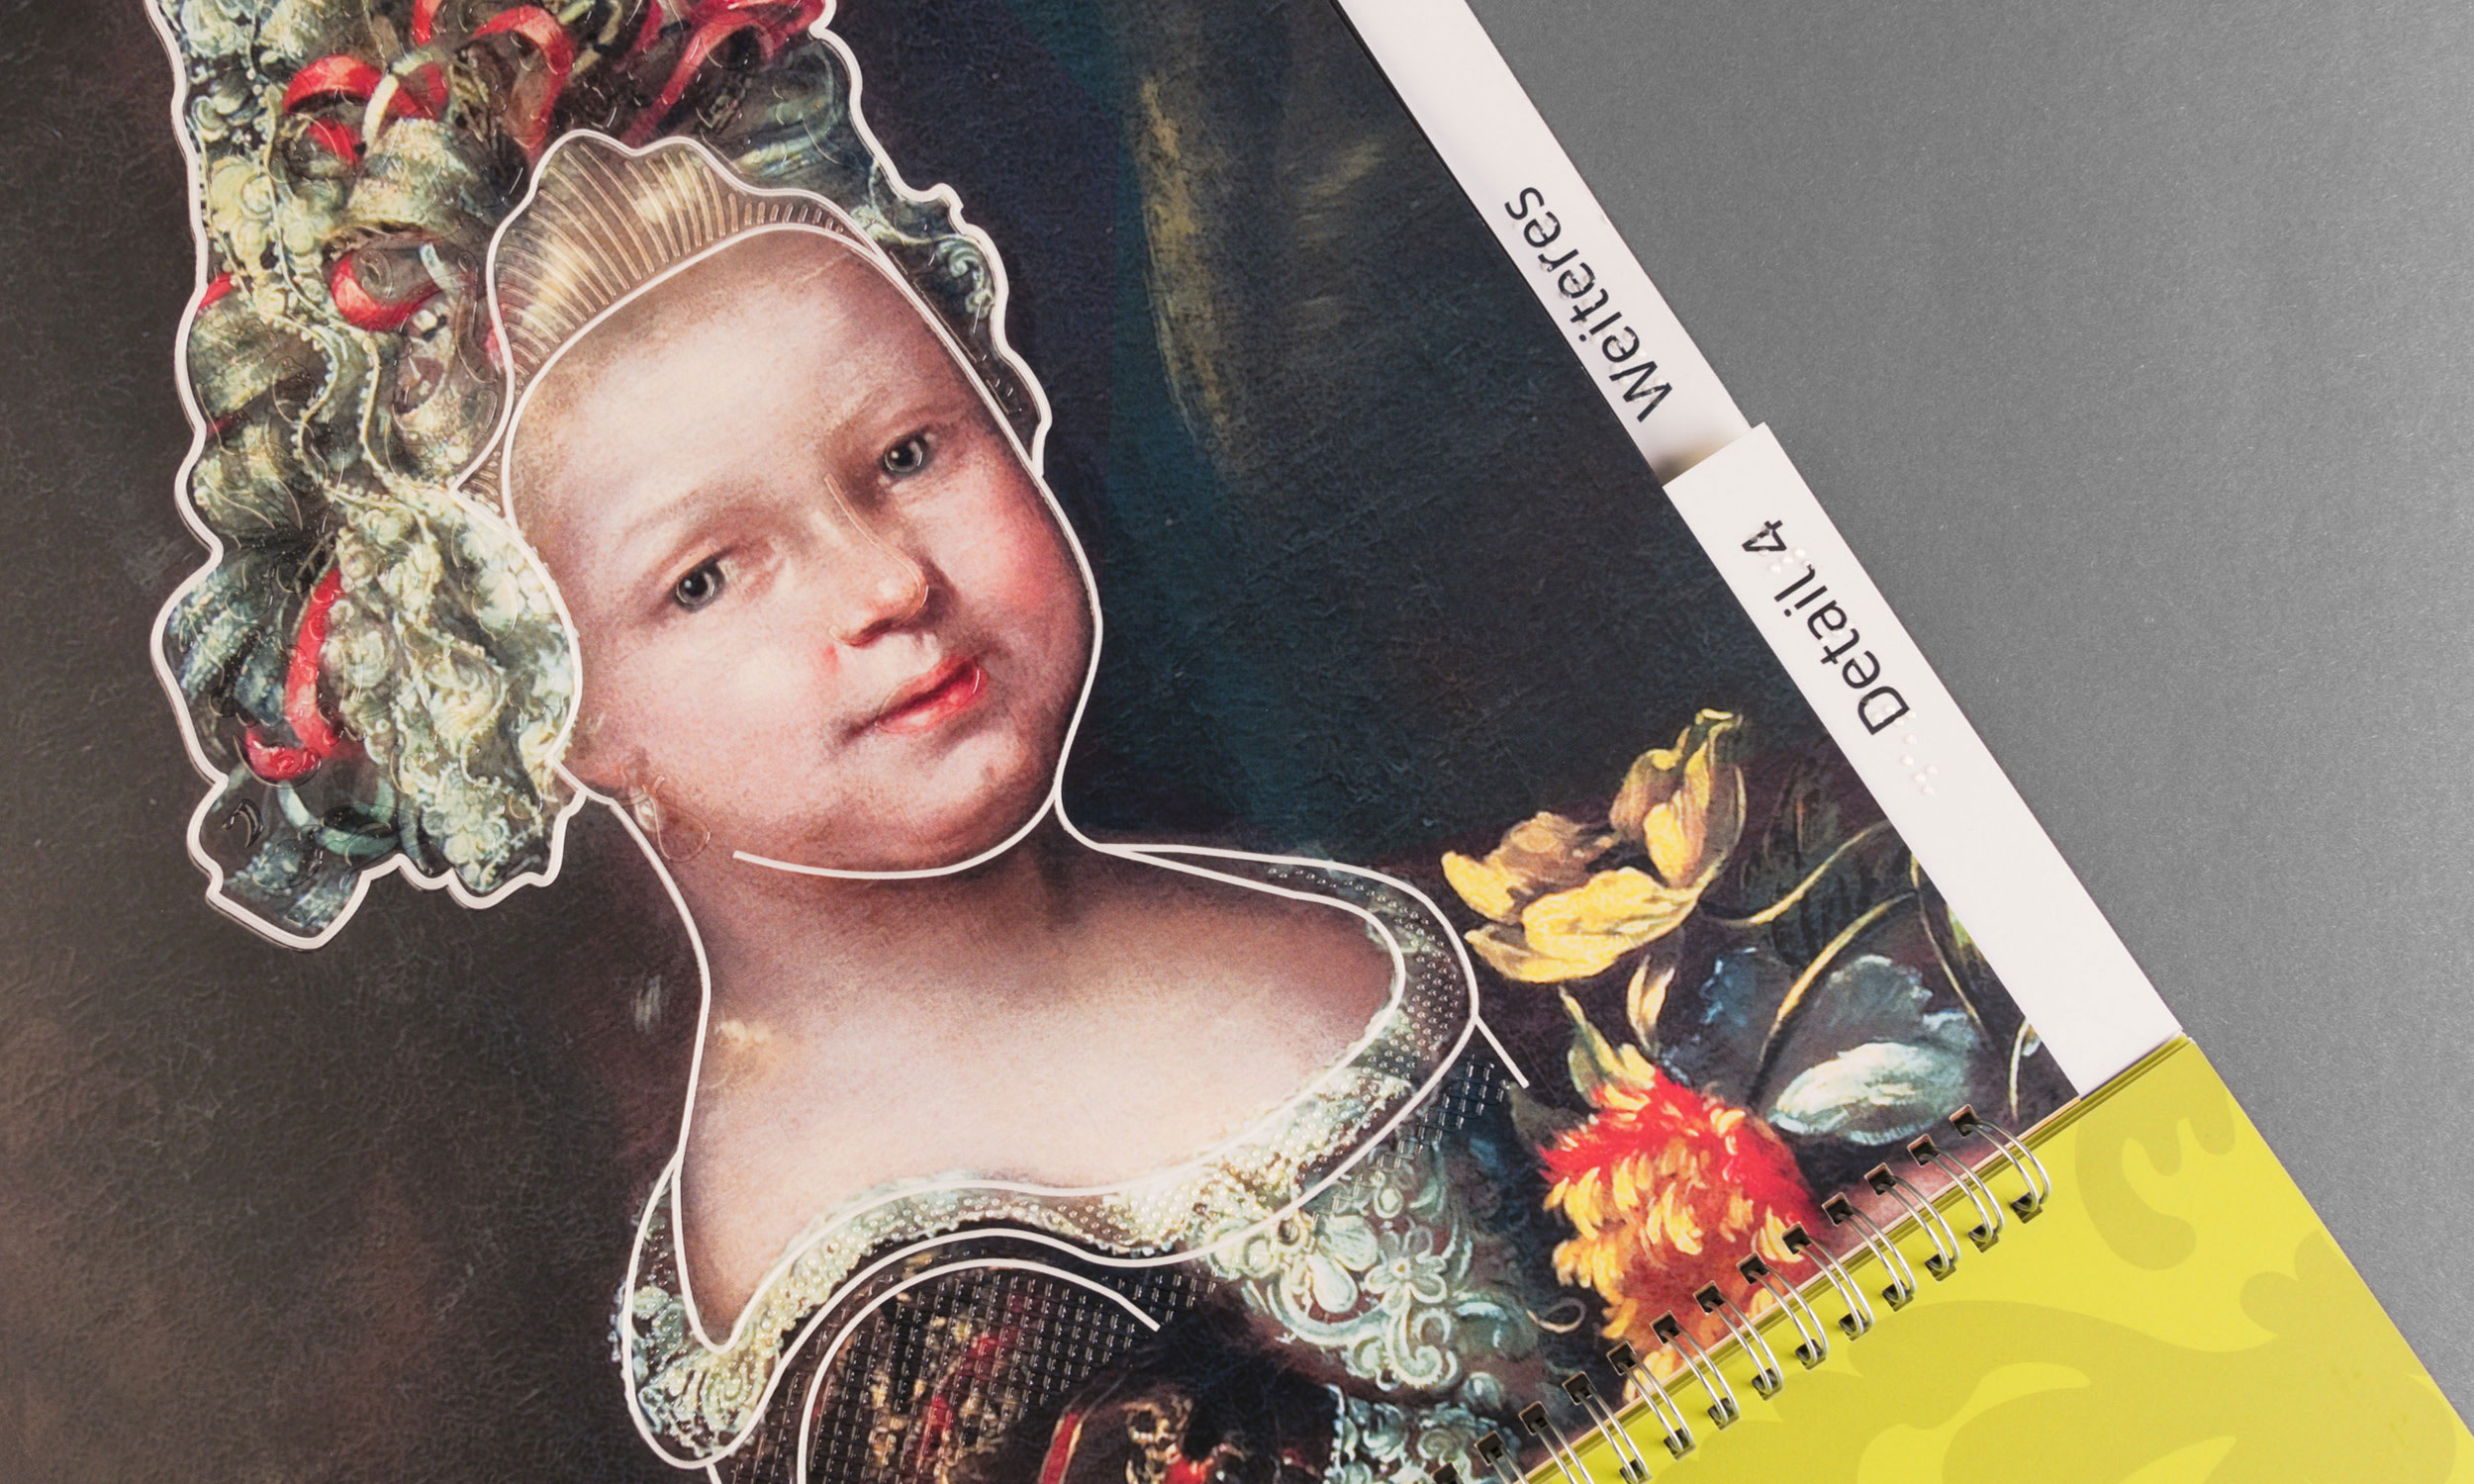 Detail photo with close-up view of the "Little Princess" on the title of the tactile accompanying booklet